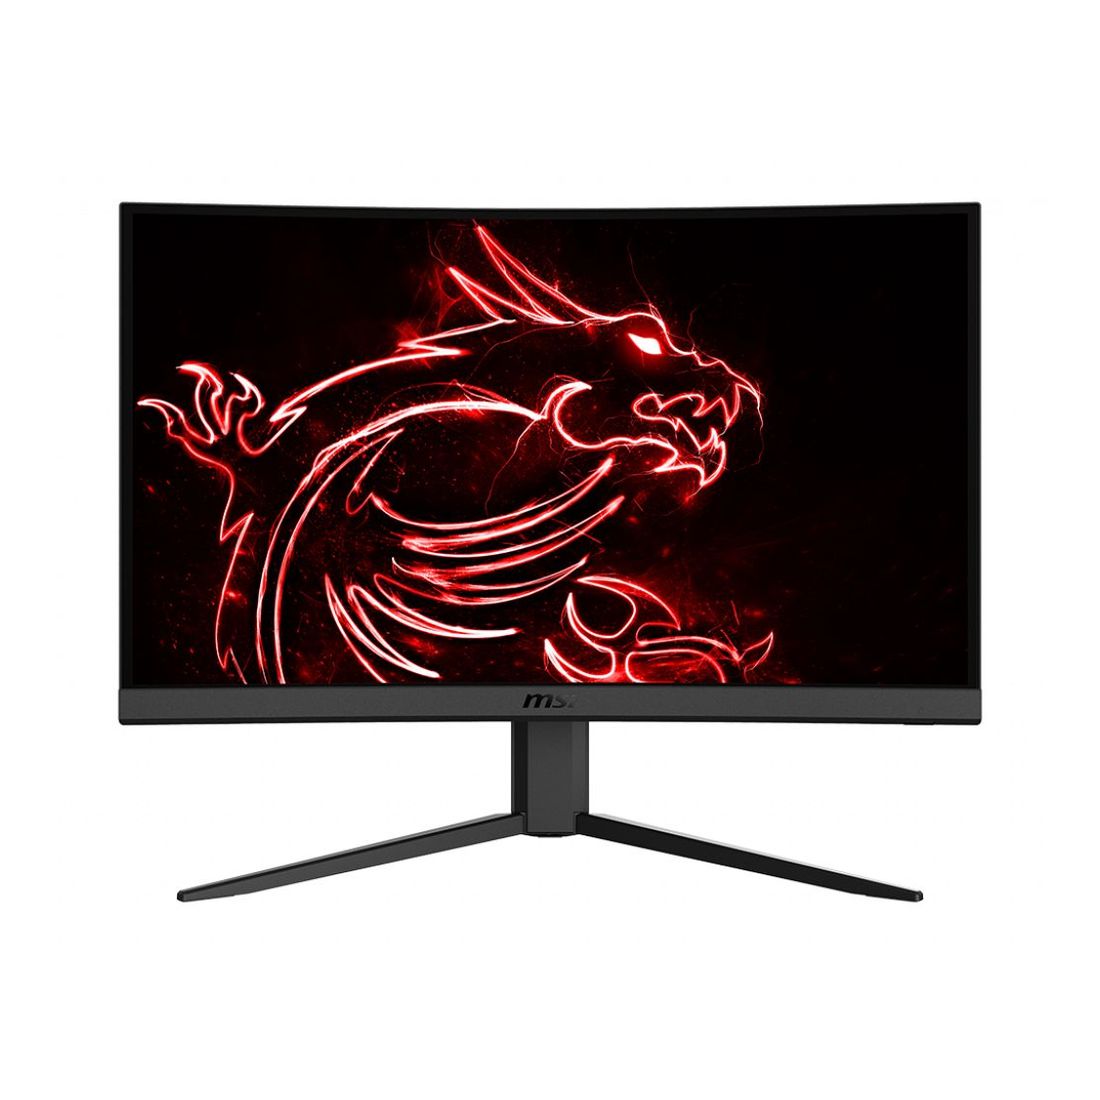 MSI Optix G24C4 23.6-Inch FHD/144Hz Curved Gaming Monitor